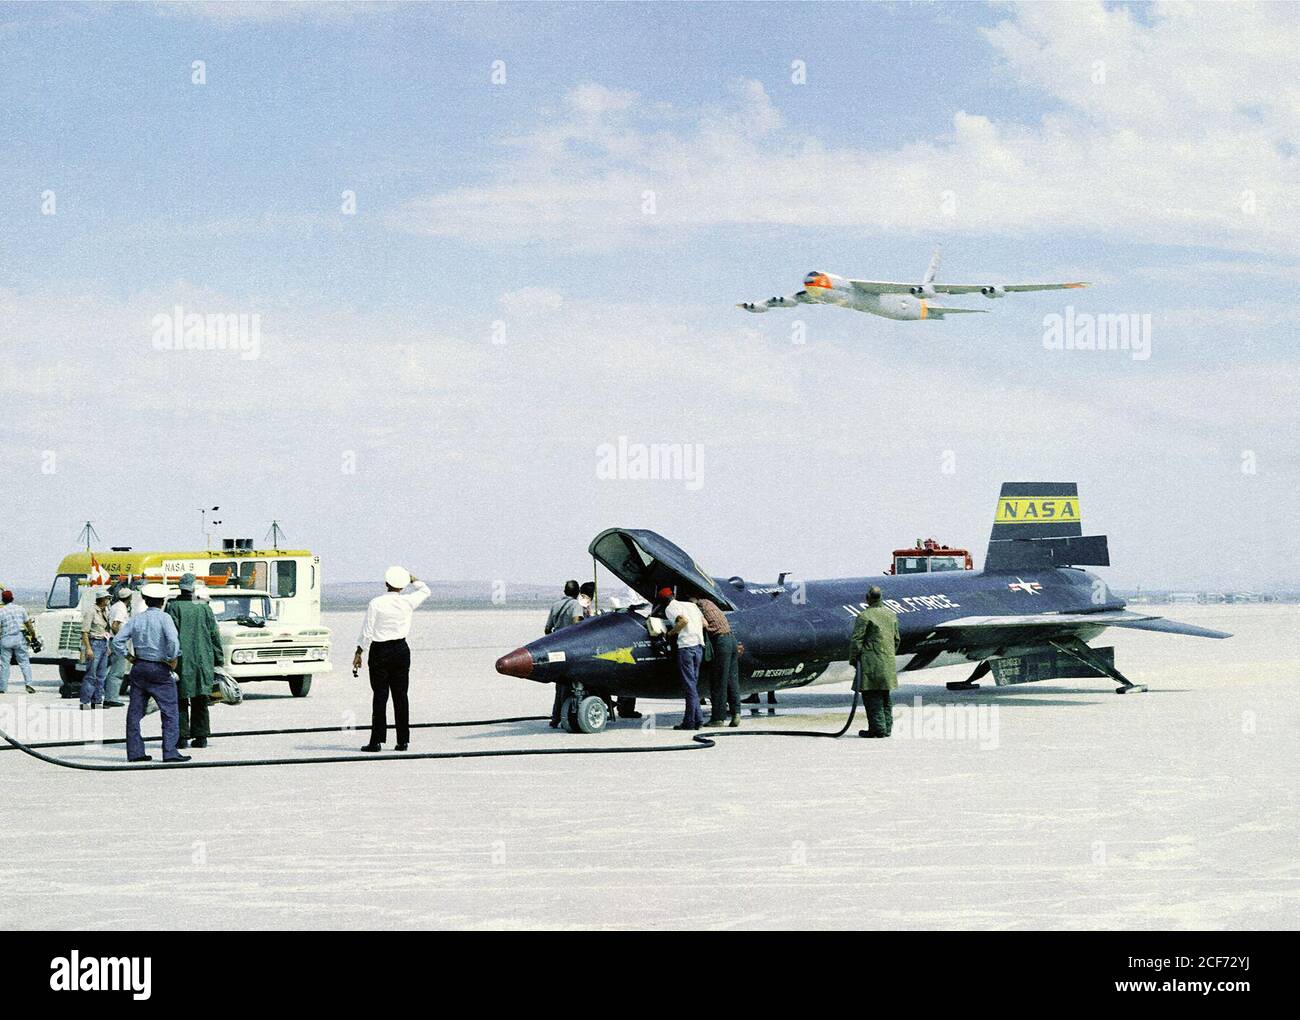 As crew members secure the X-15 rocket-powered aircraft after a research flight, the B-52 mothership used for launching this unique aircraft does a low fly-by overhead. The X-15s made a total of 199 flights over a period of nearly 10 years from 1959 to 1968, and set unofficial world speed and altitude records of 4,520 mph (Mach 6.7) and 354,200 feet. Information gained from the highly successful X-15 program contributed to the development of the Mercury, Gemini, and Apollo piloted spaceflight programs, and also the Space Shuttle program. Stock Photo